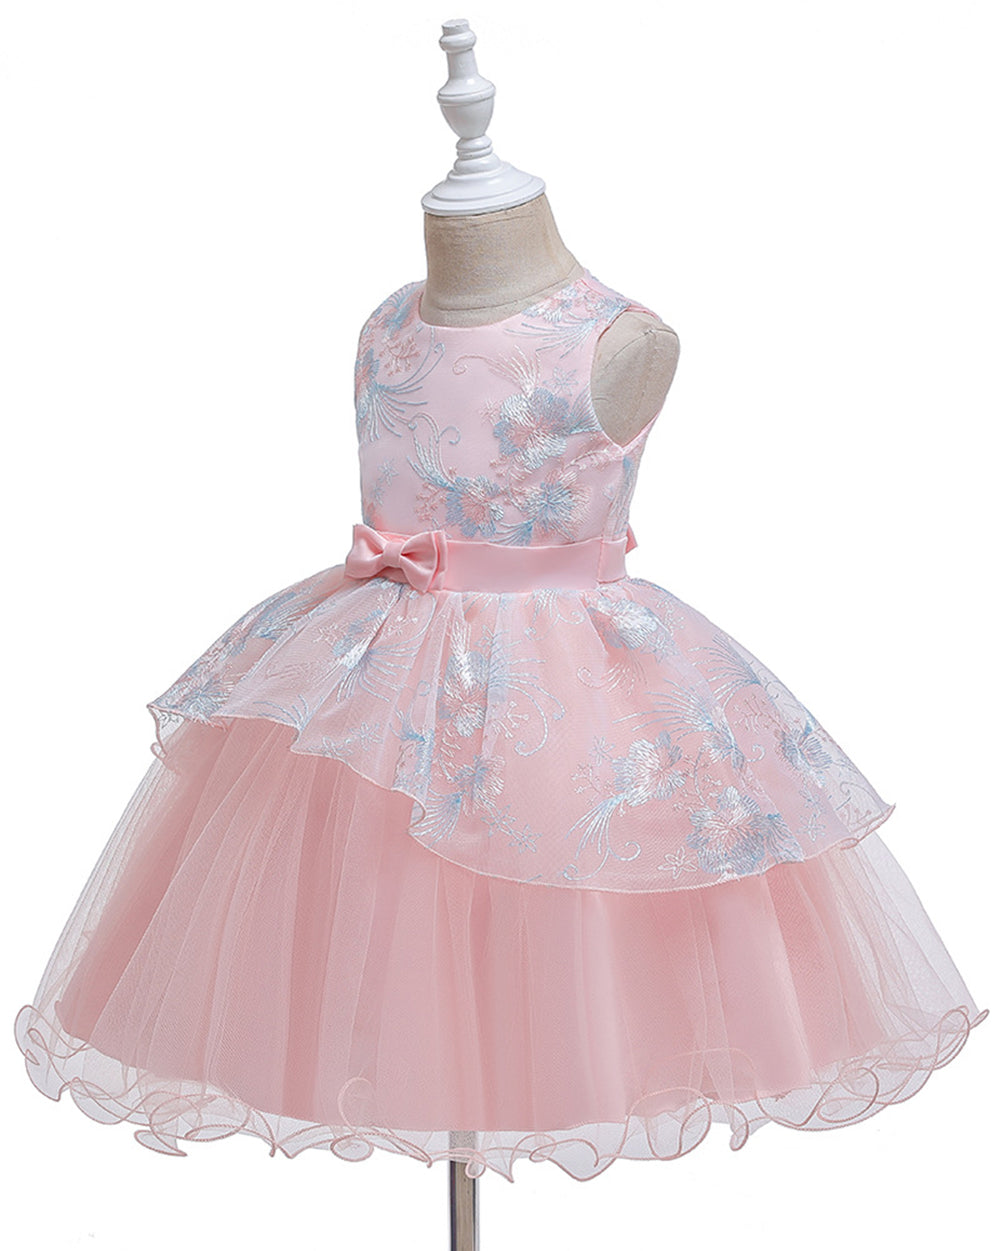 Girls Sleeveless Embroidered Bow Tie Dress Party Wedding Flower Dress